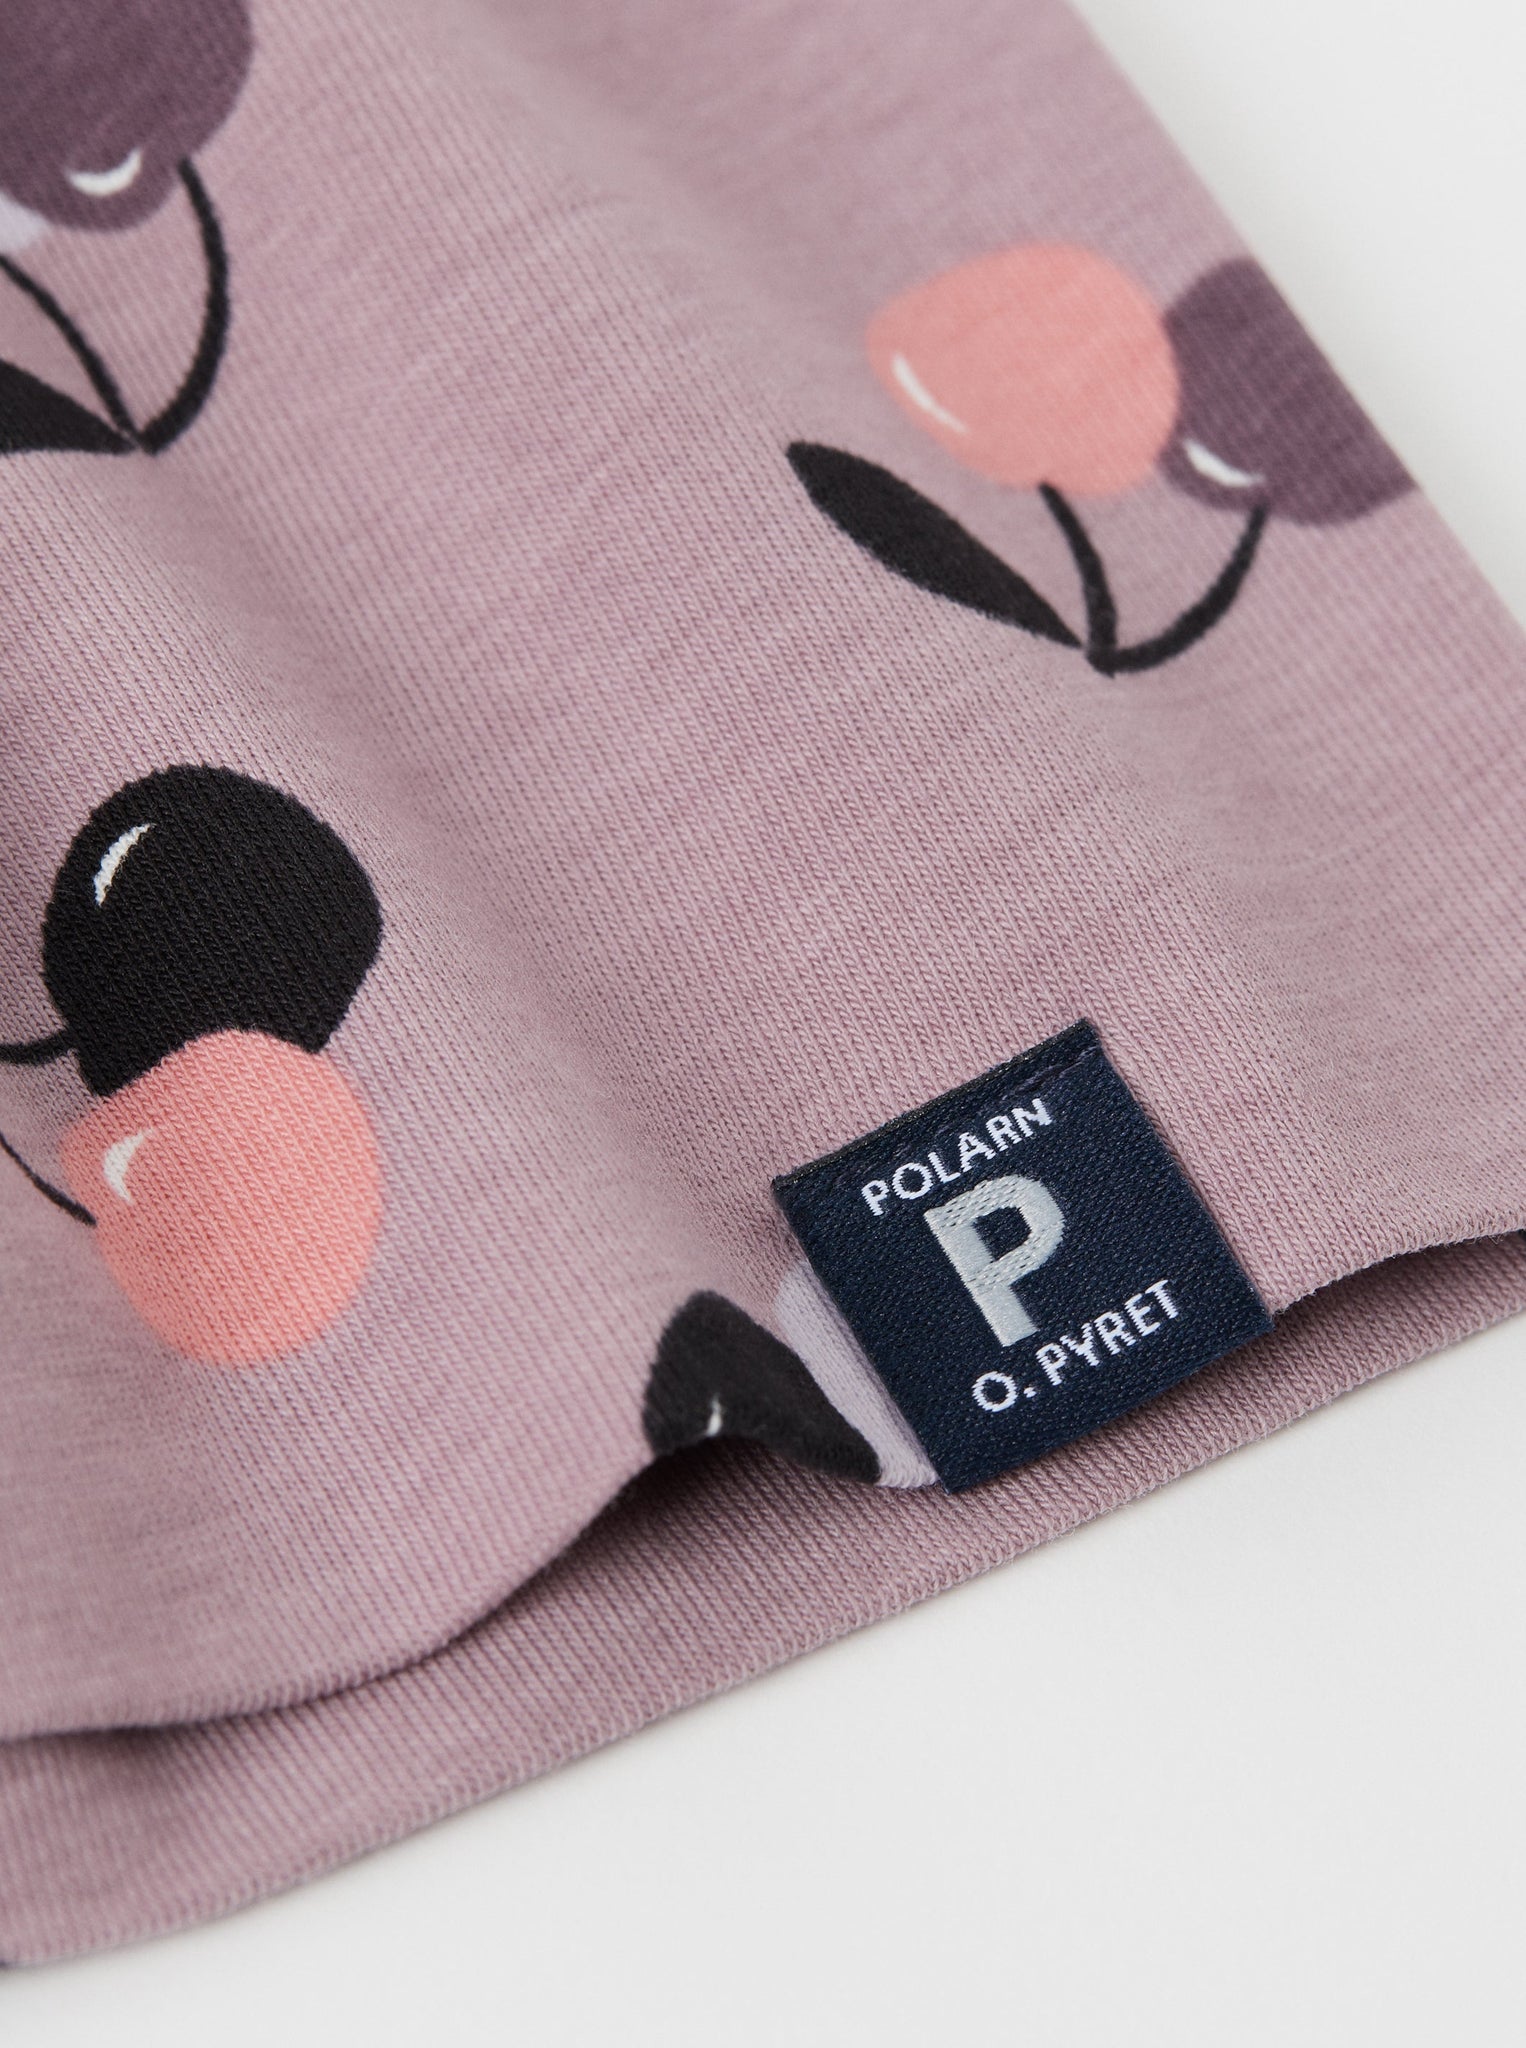 Cotton Cherry Print Pink Kids Beanie from the Polarn O. Pyret kidswear collection. The best ethical kids clothes